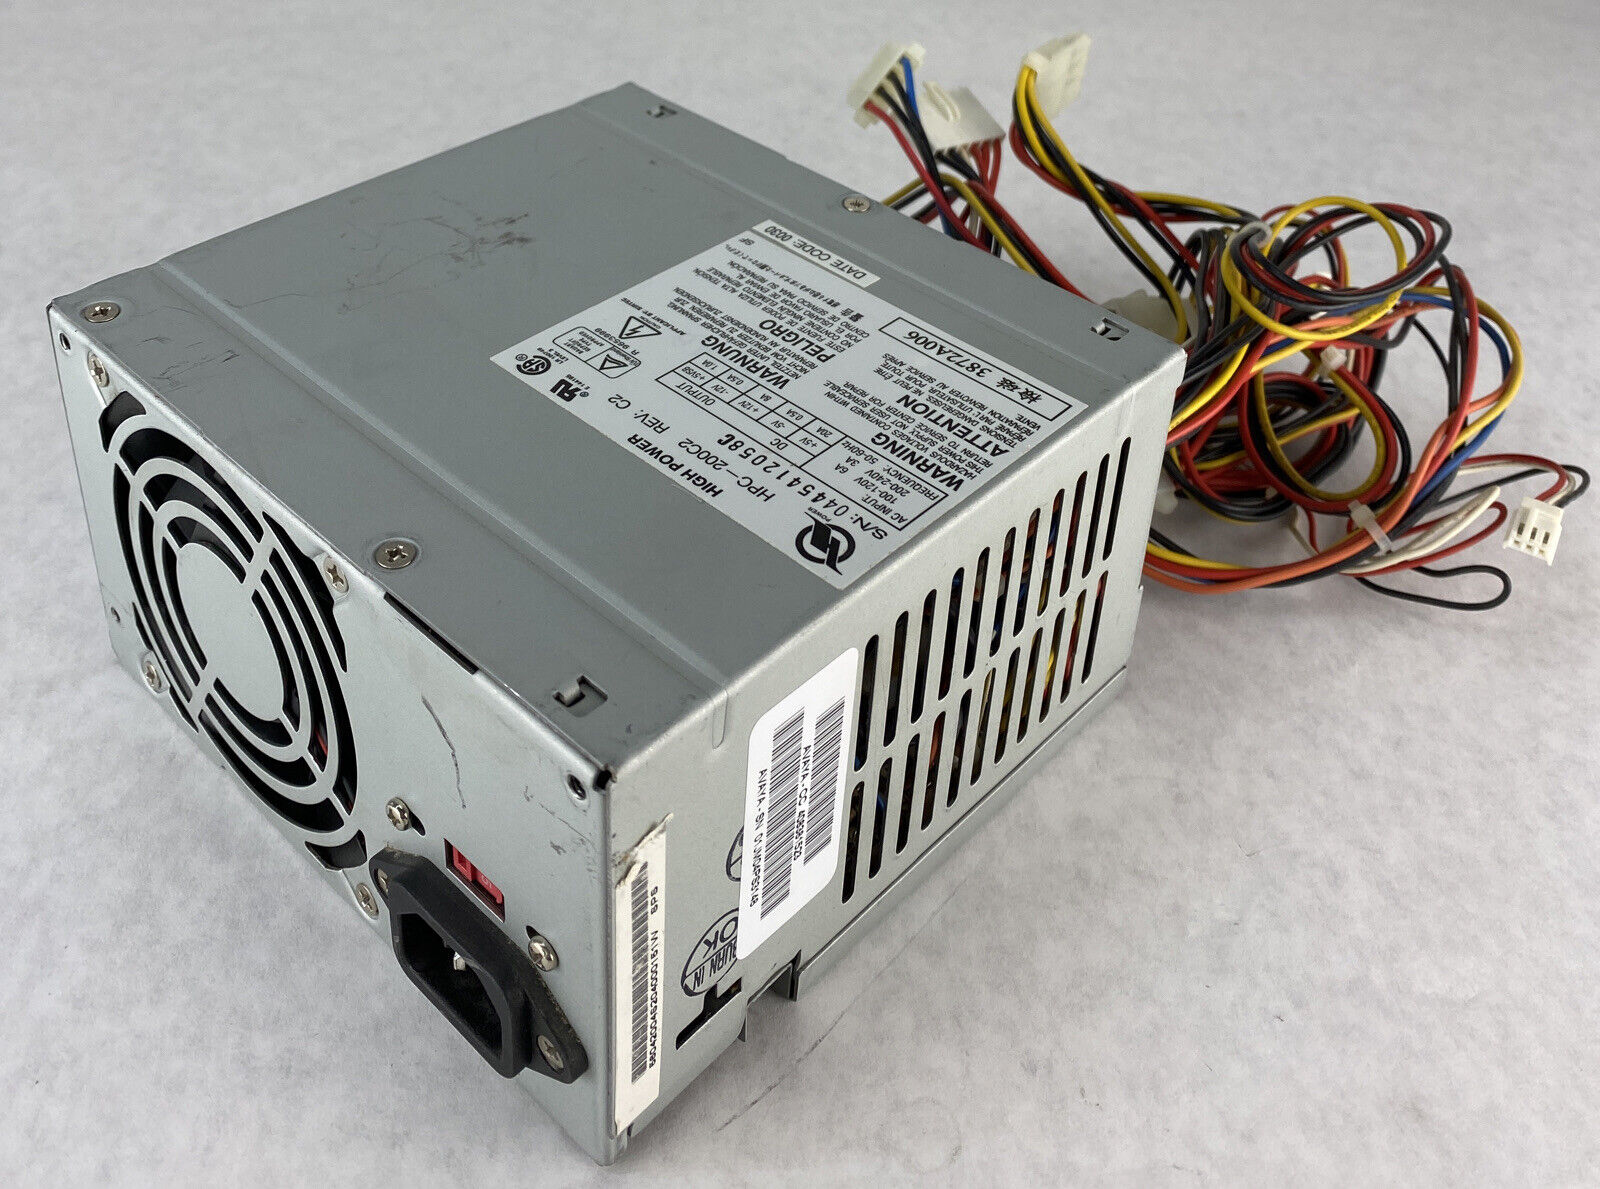 HPC-200C2 Rev. C2 Clone Replacement AT Power Supply Replaces Avaya 408381523